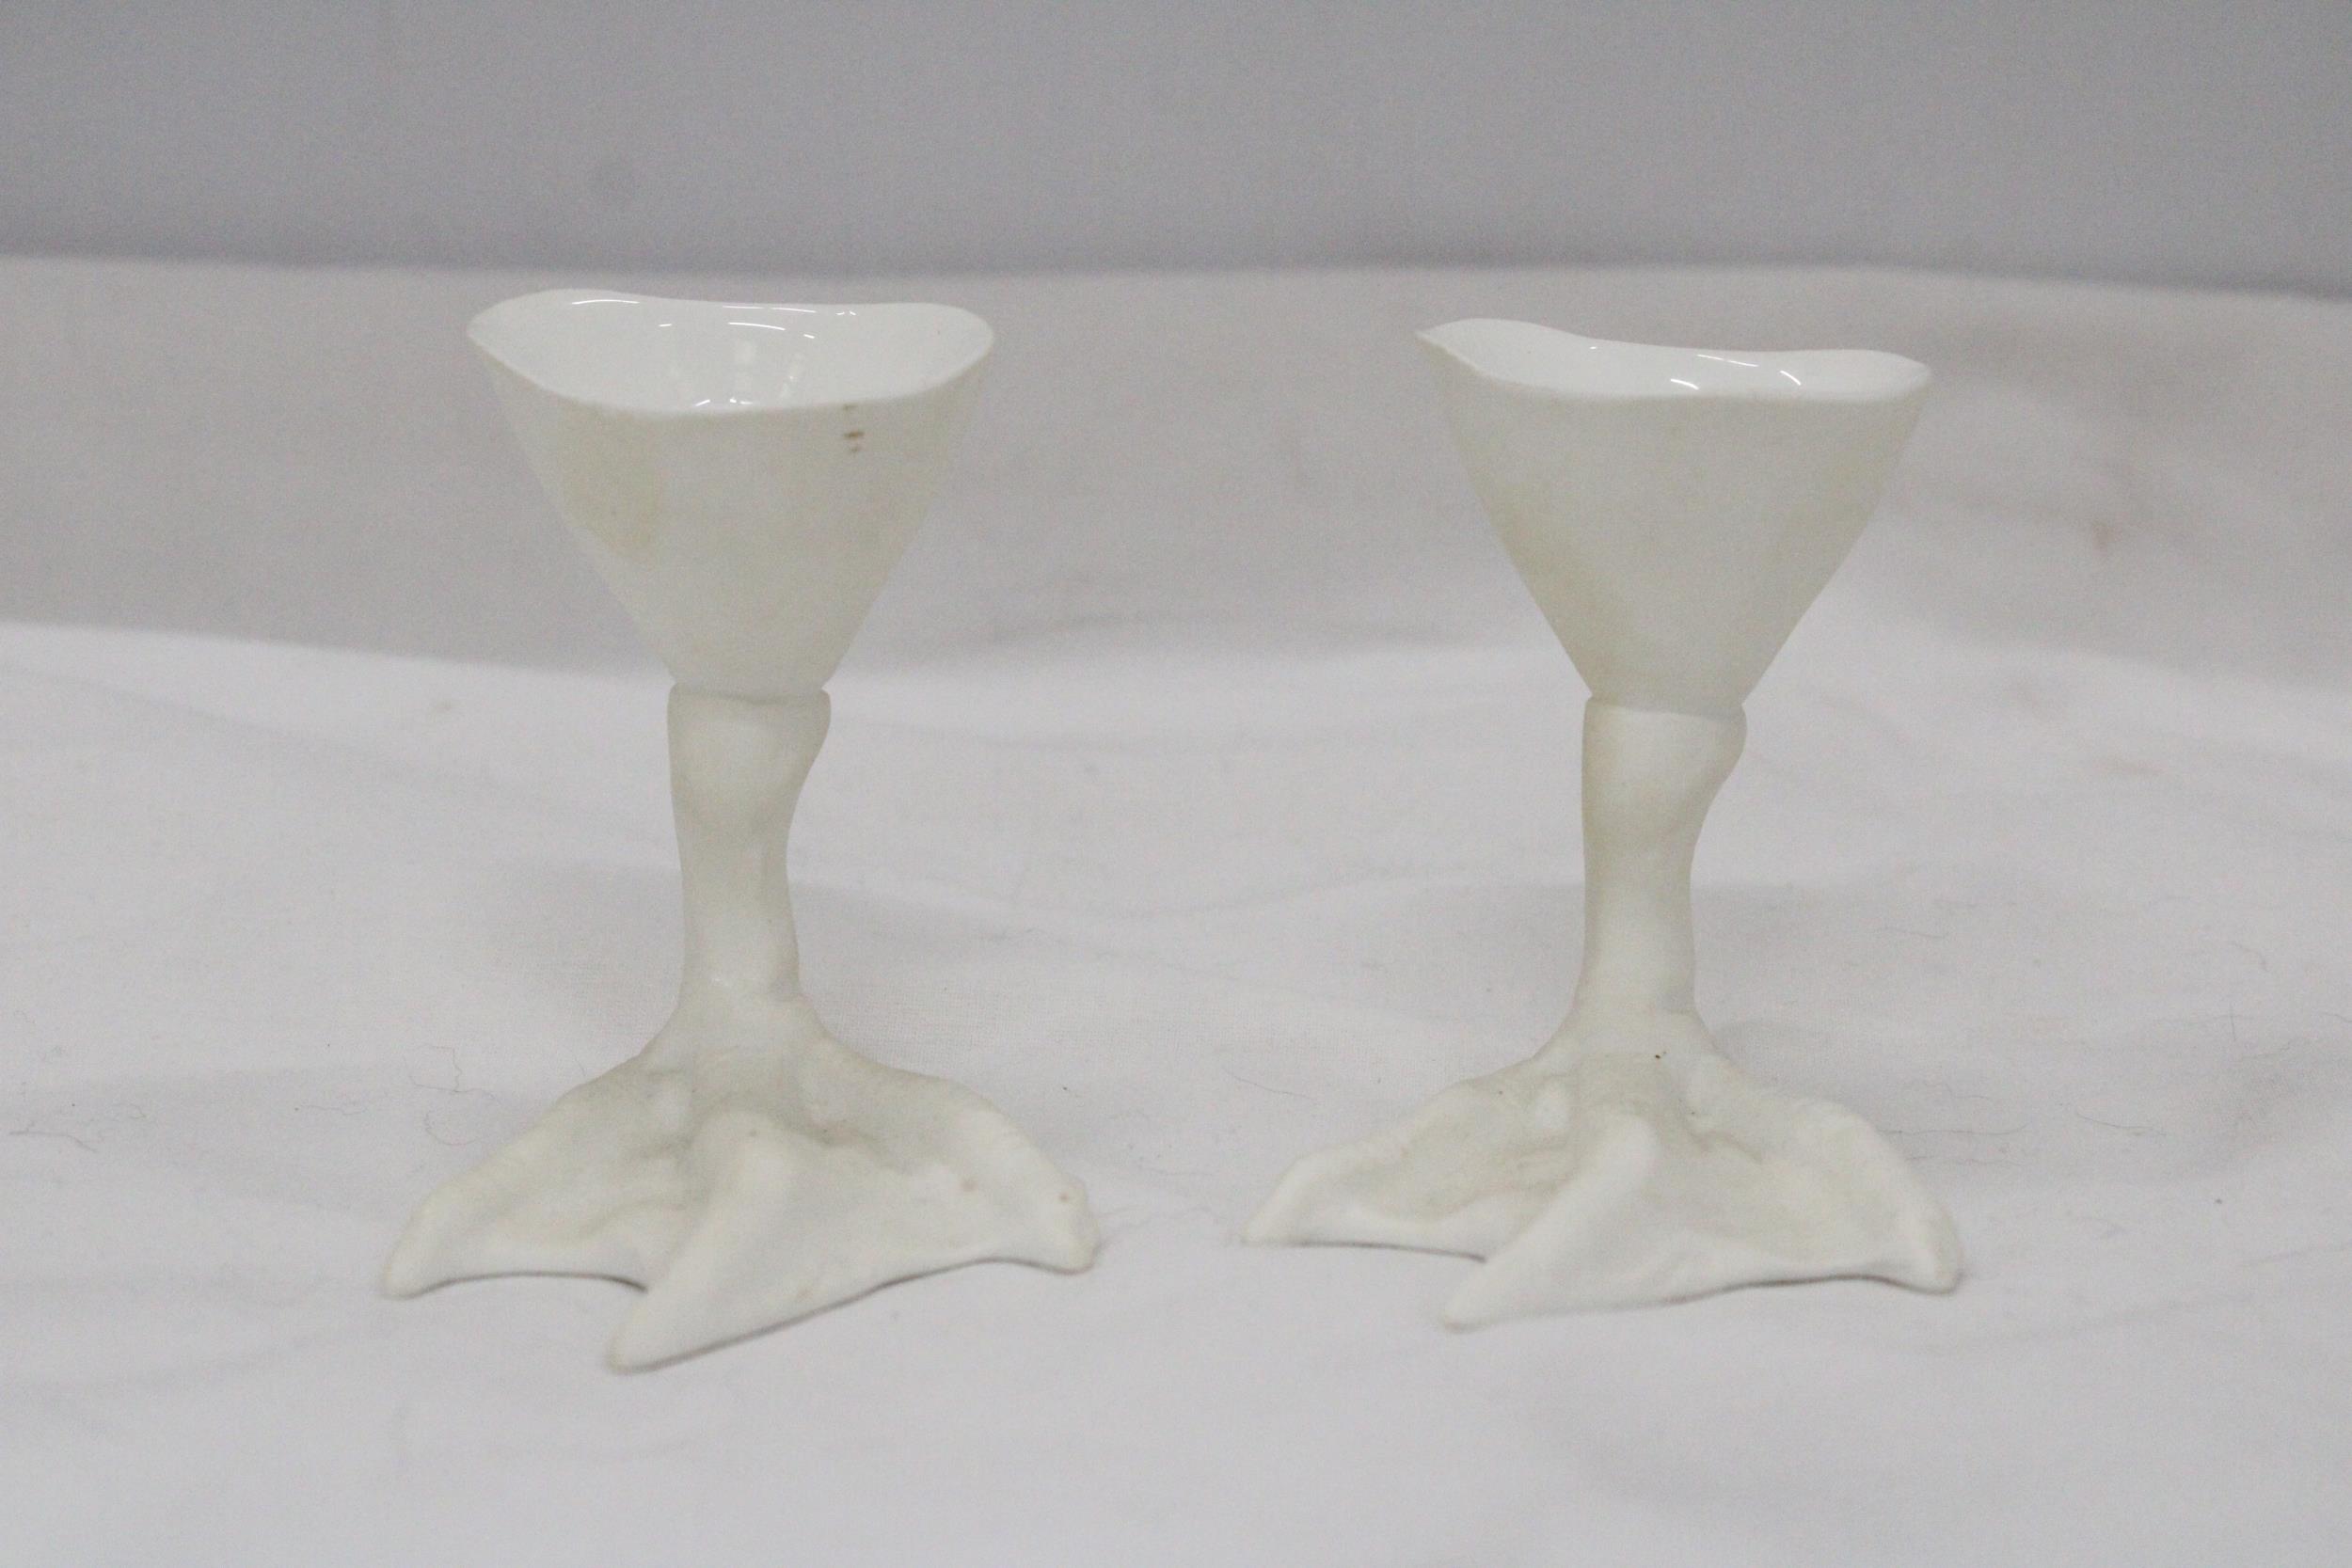 TWO SERAX, PEKING DUCK FOOT EGG CUPS, BOTH IN GOOD CONDITION